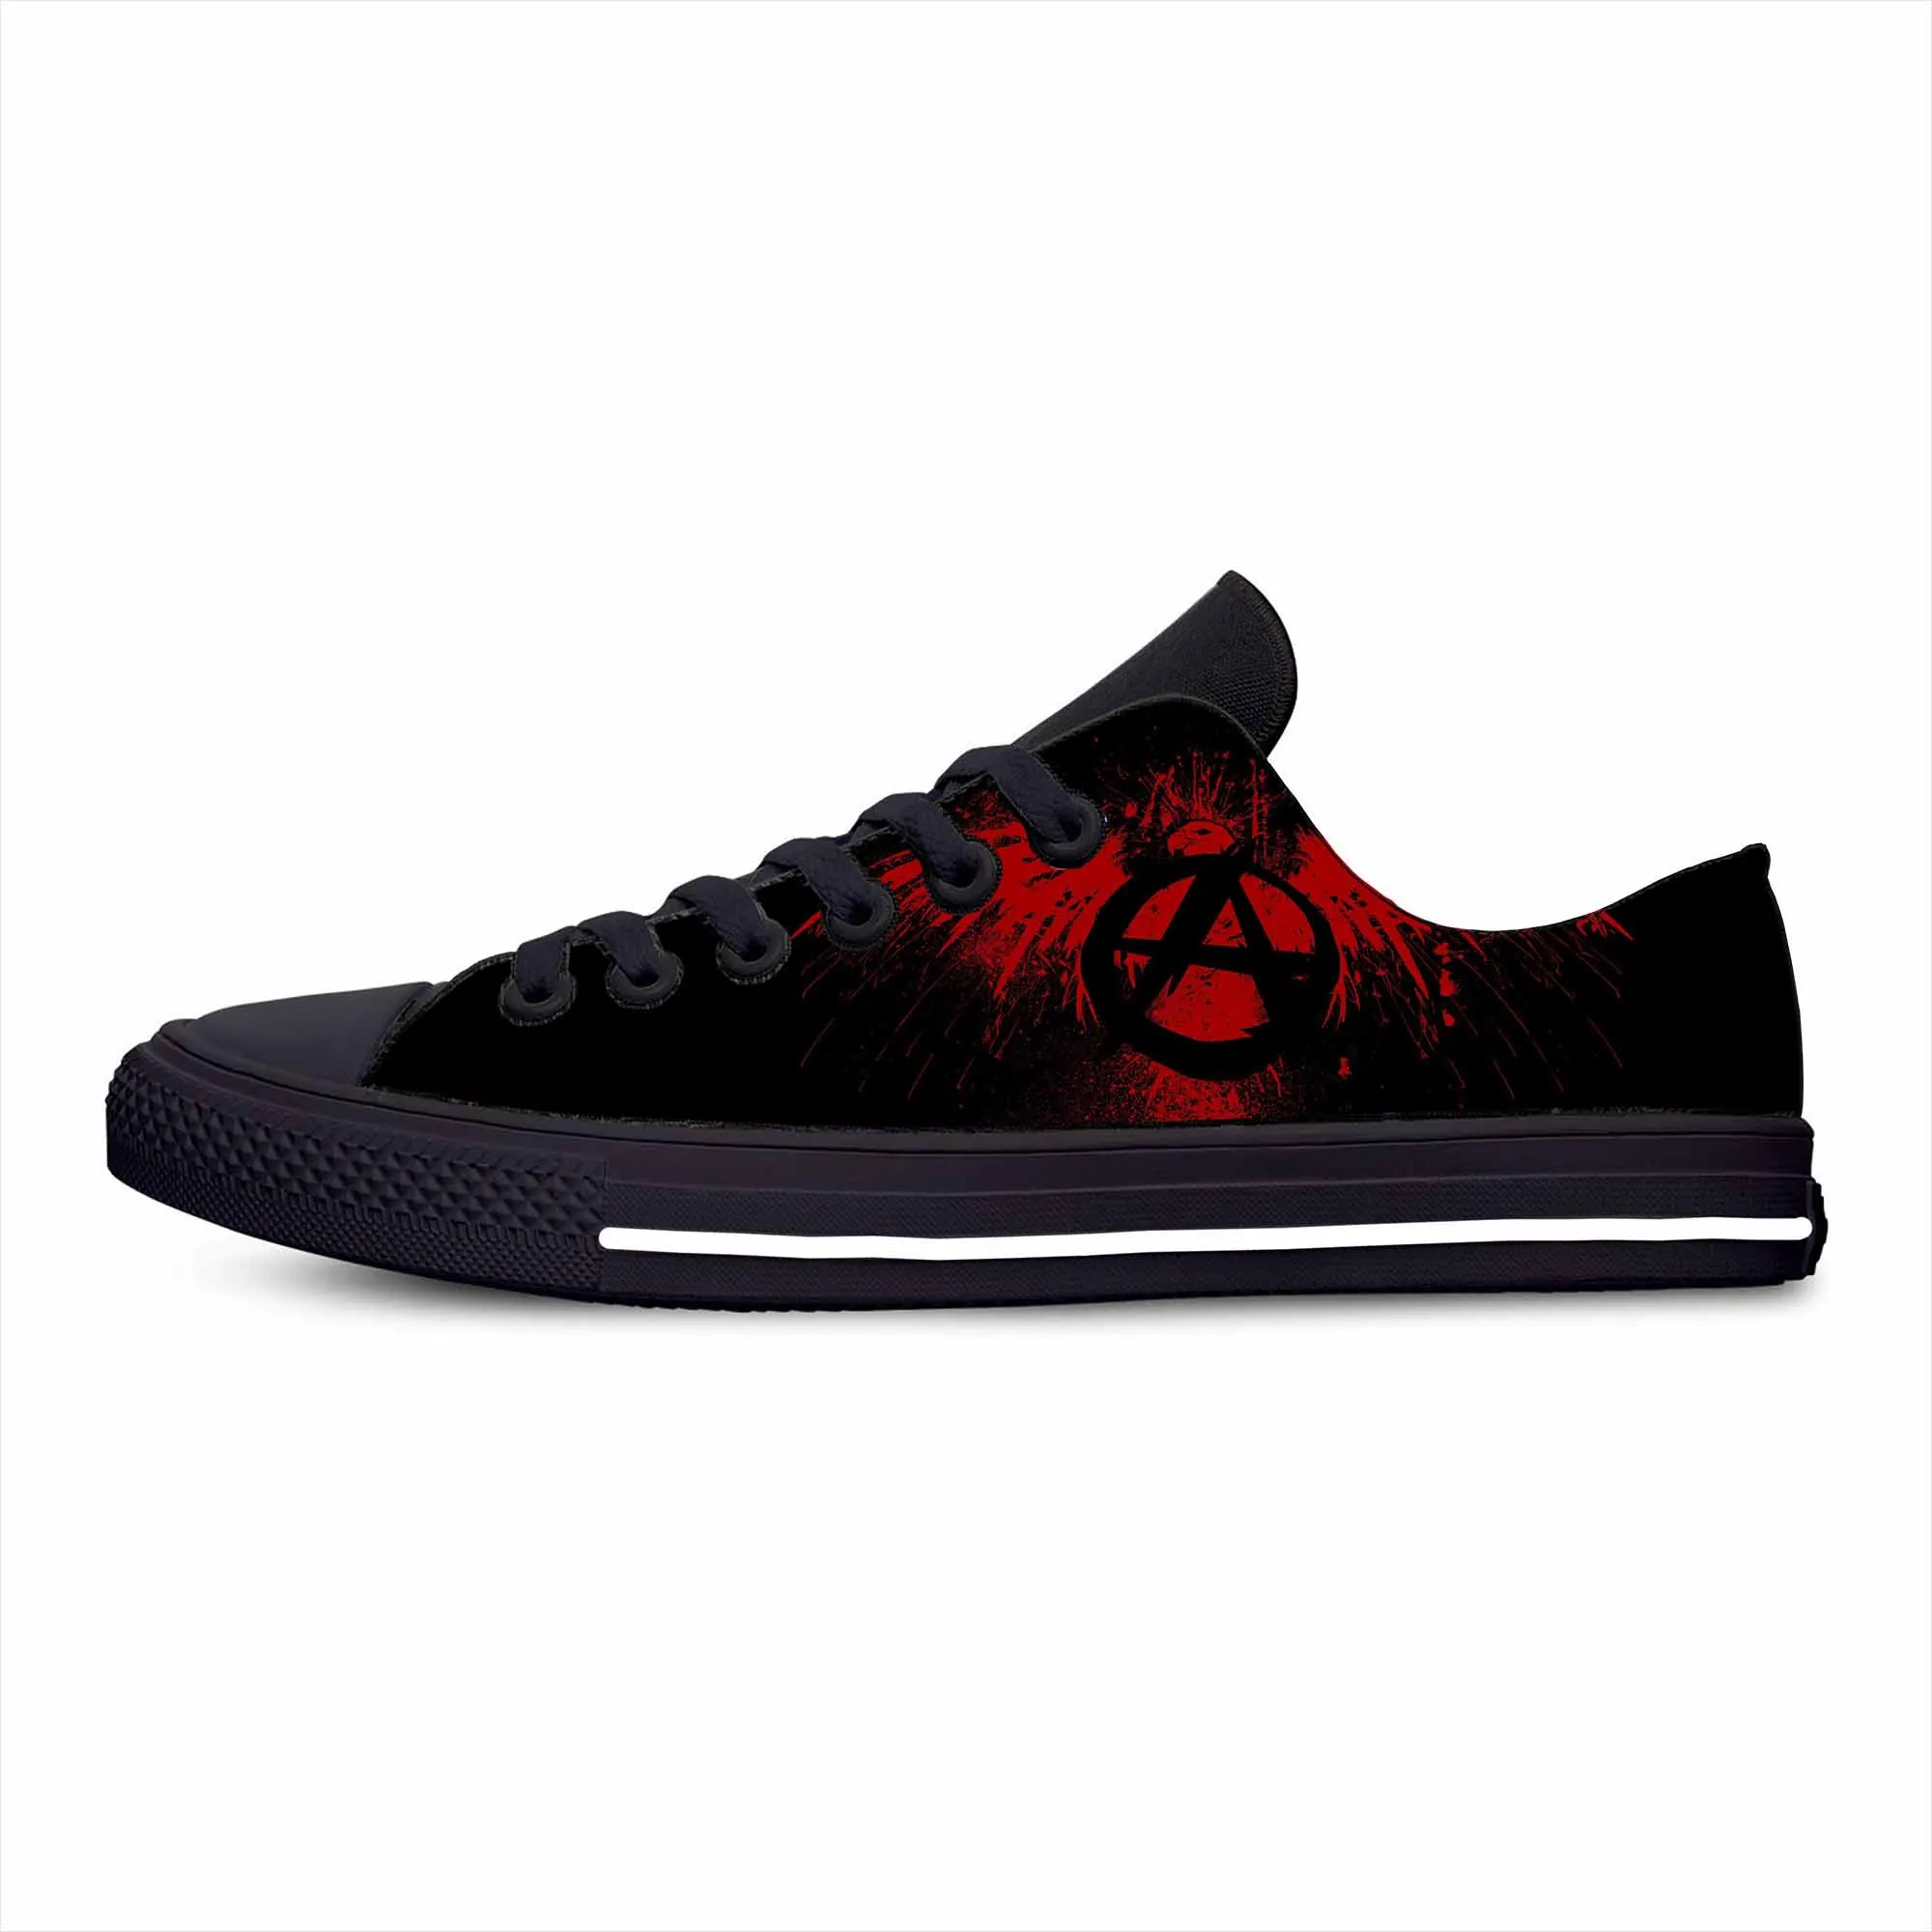 

Anarchy Anarchist Anarchism Symbol Fashion Popular Casual Cloth Shoes Low Top Comfortable Breathable 3D Print Men Women Sneakers